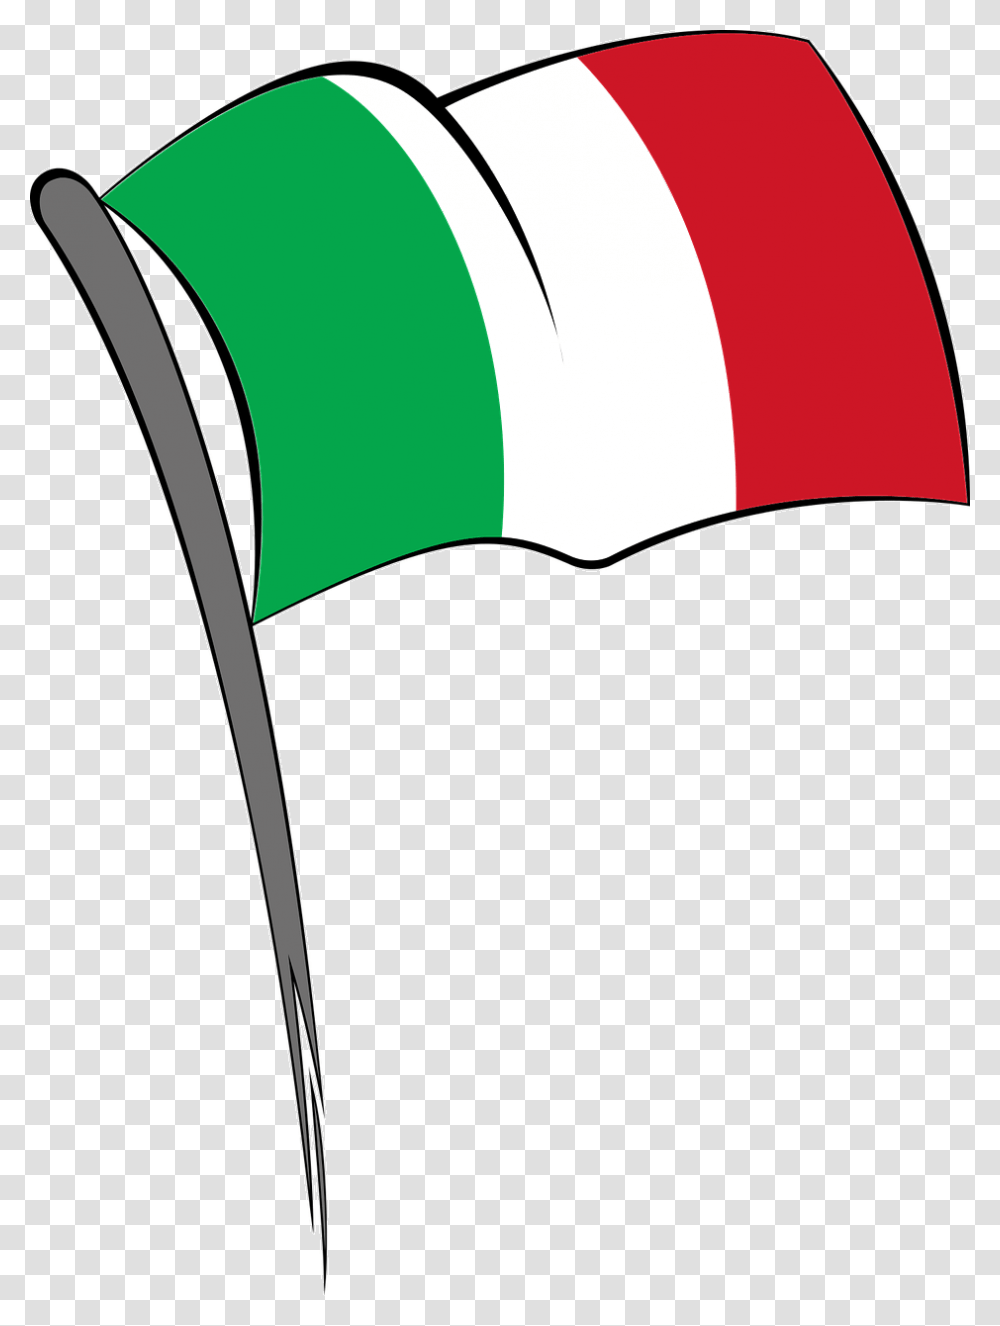 Commune De Tange Cours Langues Clipart Italy Flag, Bow, American Flag, Recycling Symbol Transparent Png